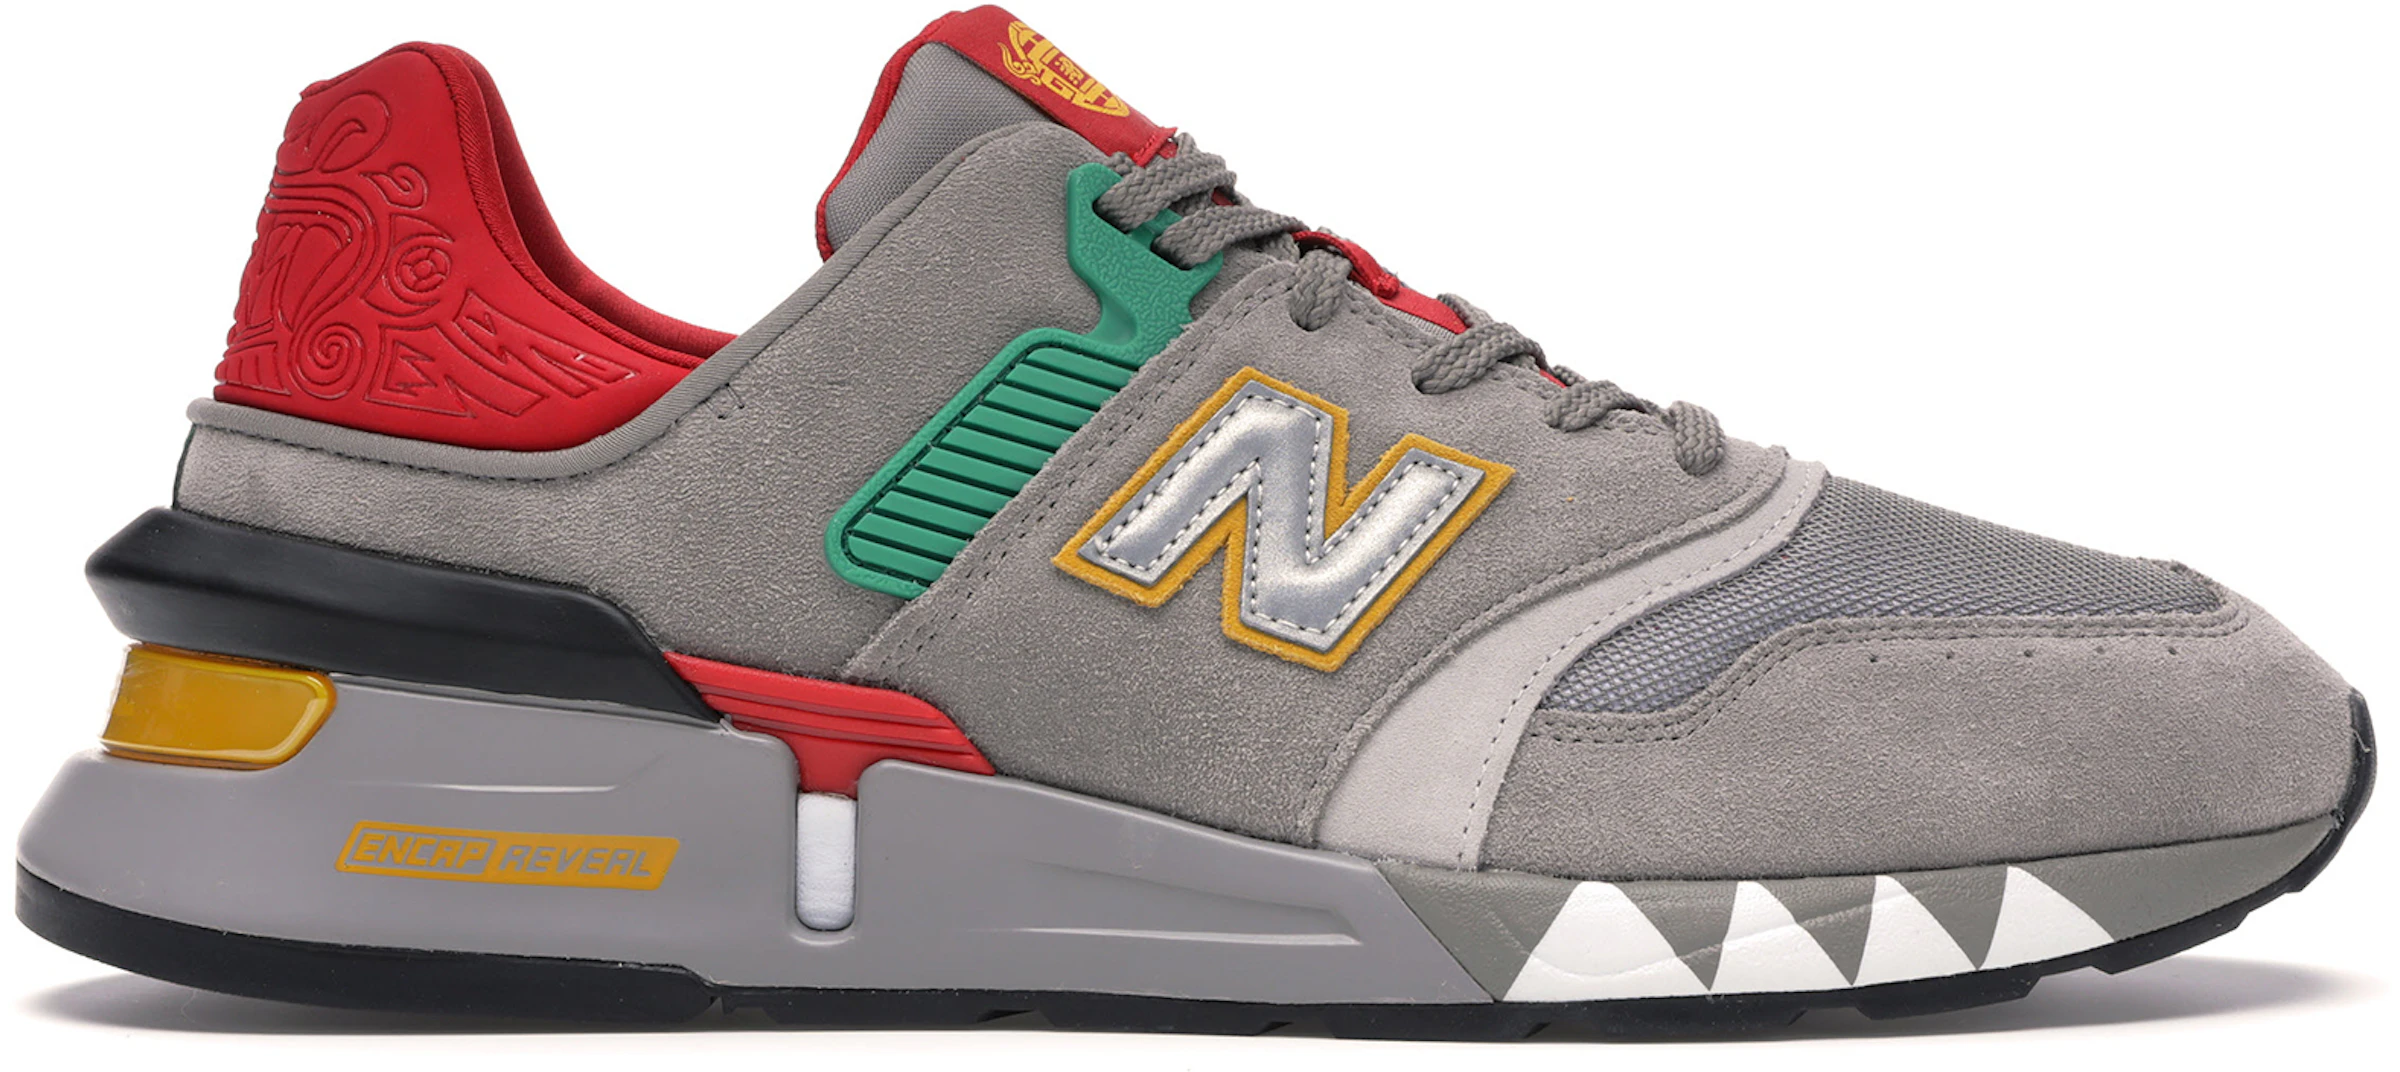 In detail compact Verlenen ニューバランス 996 スポーツ チャイニーズ ニュー イヤー "グレー/レッド グリーン" (2020) New Balance 997 Sport  "Chinese New Year (2020)" - MS997XZ - JP